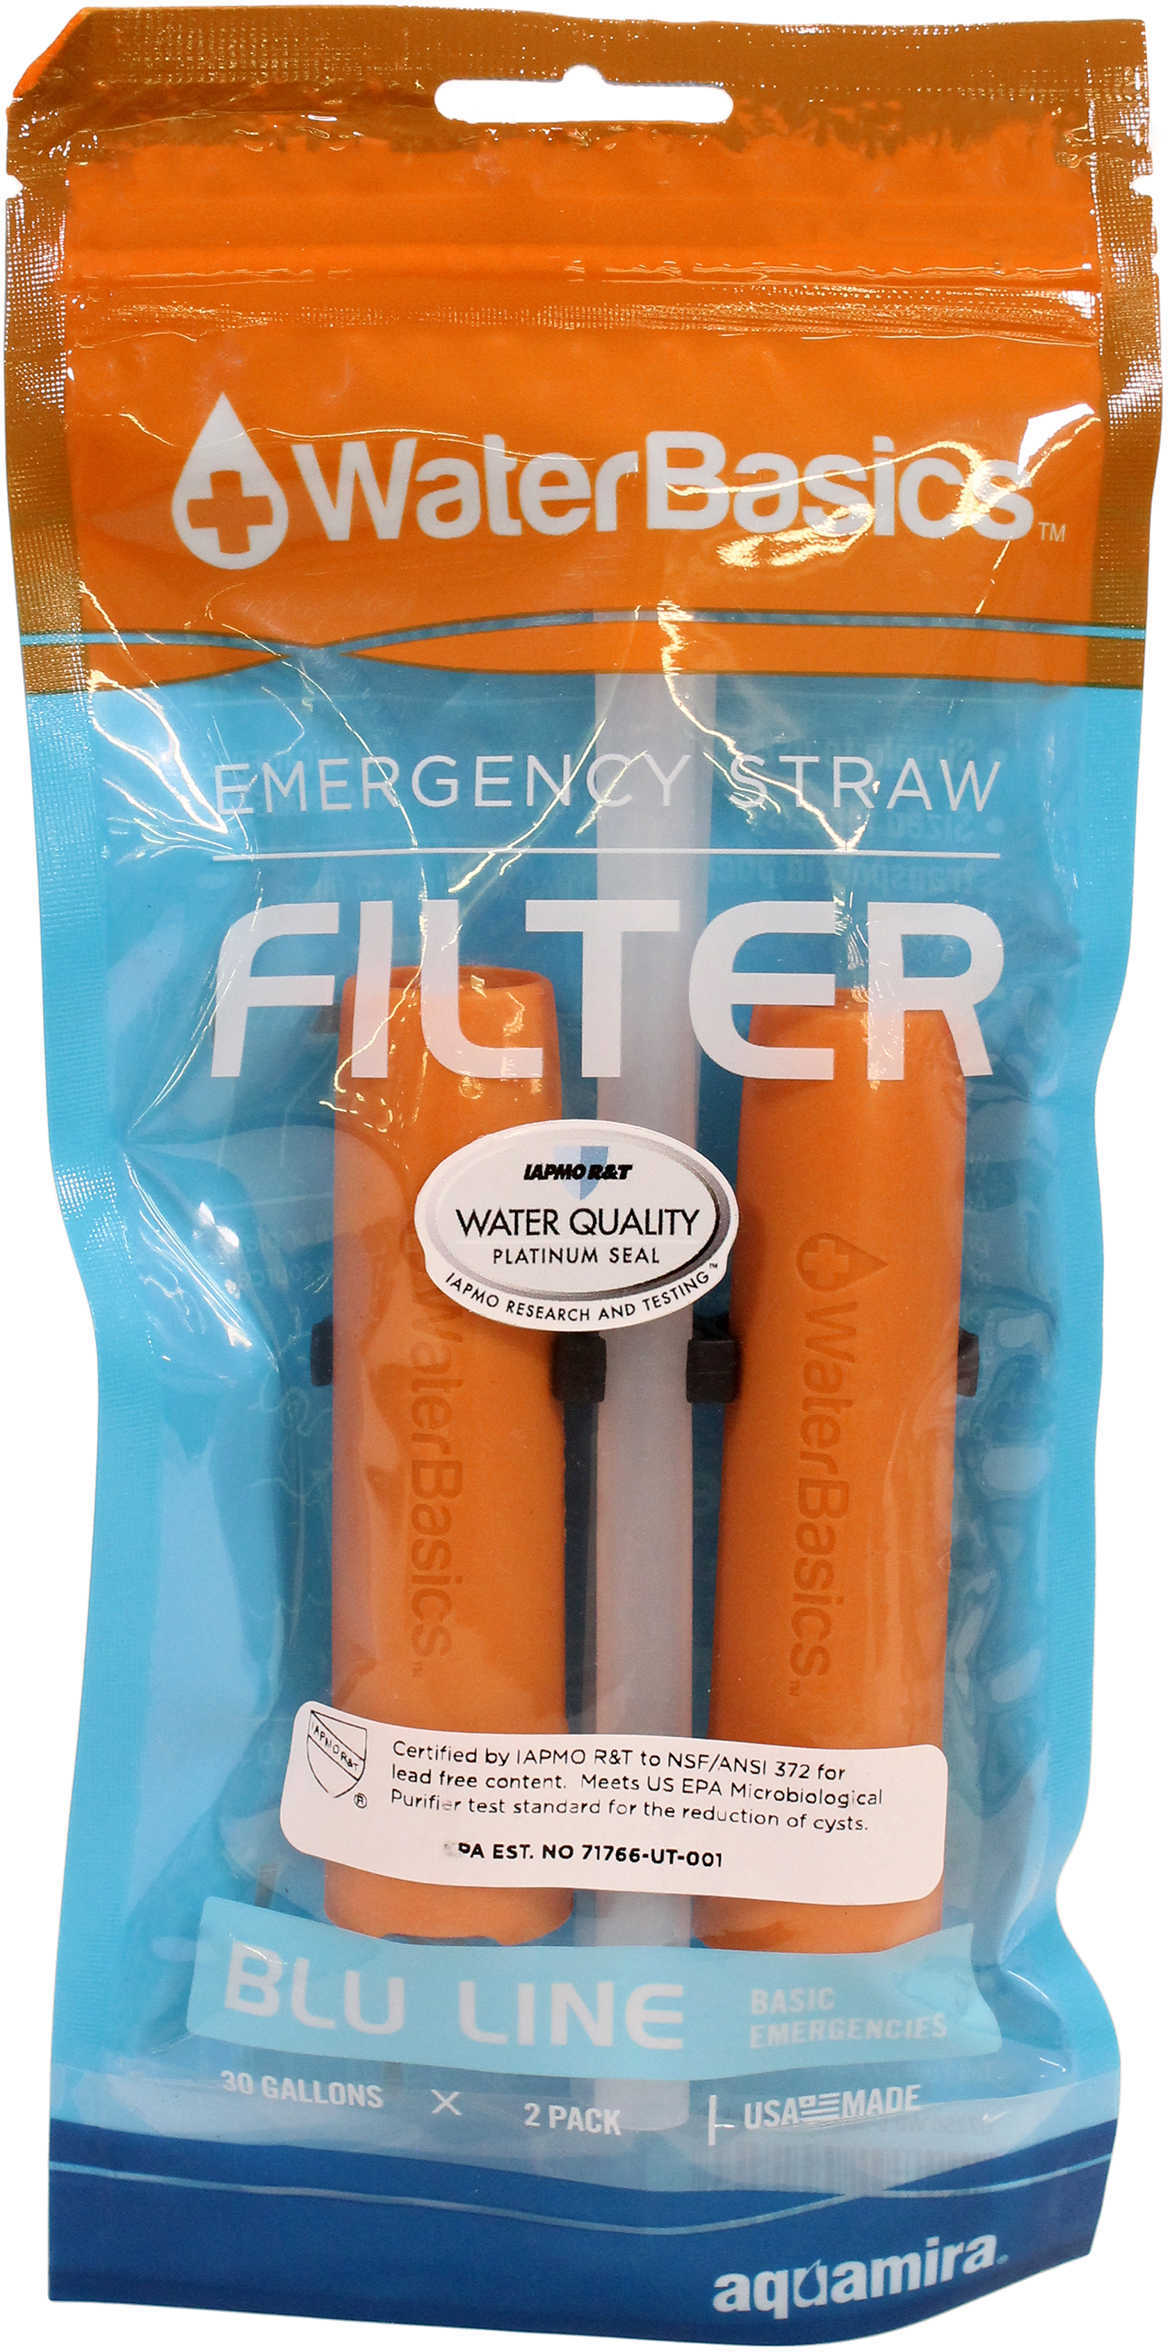 Aquamira WaterBasics Emergency Straw Filter Blu Line - Parasite Protection Filters up to 30 Gallons of per